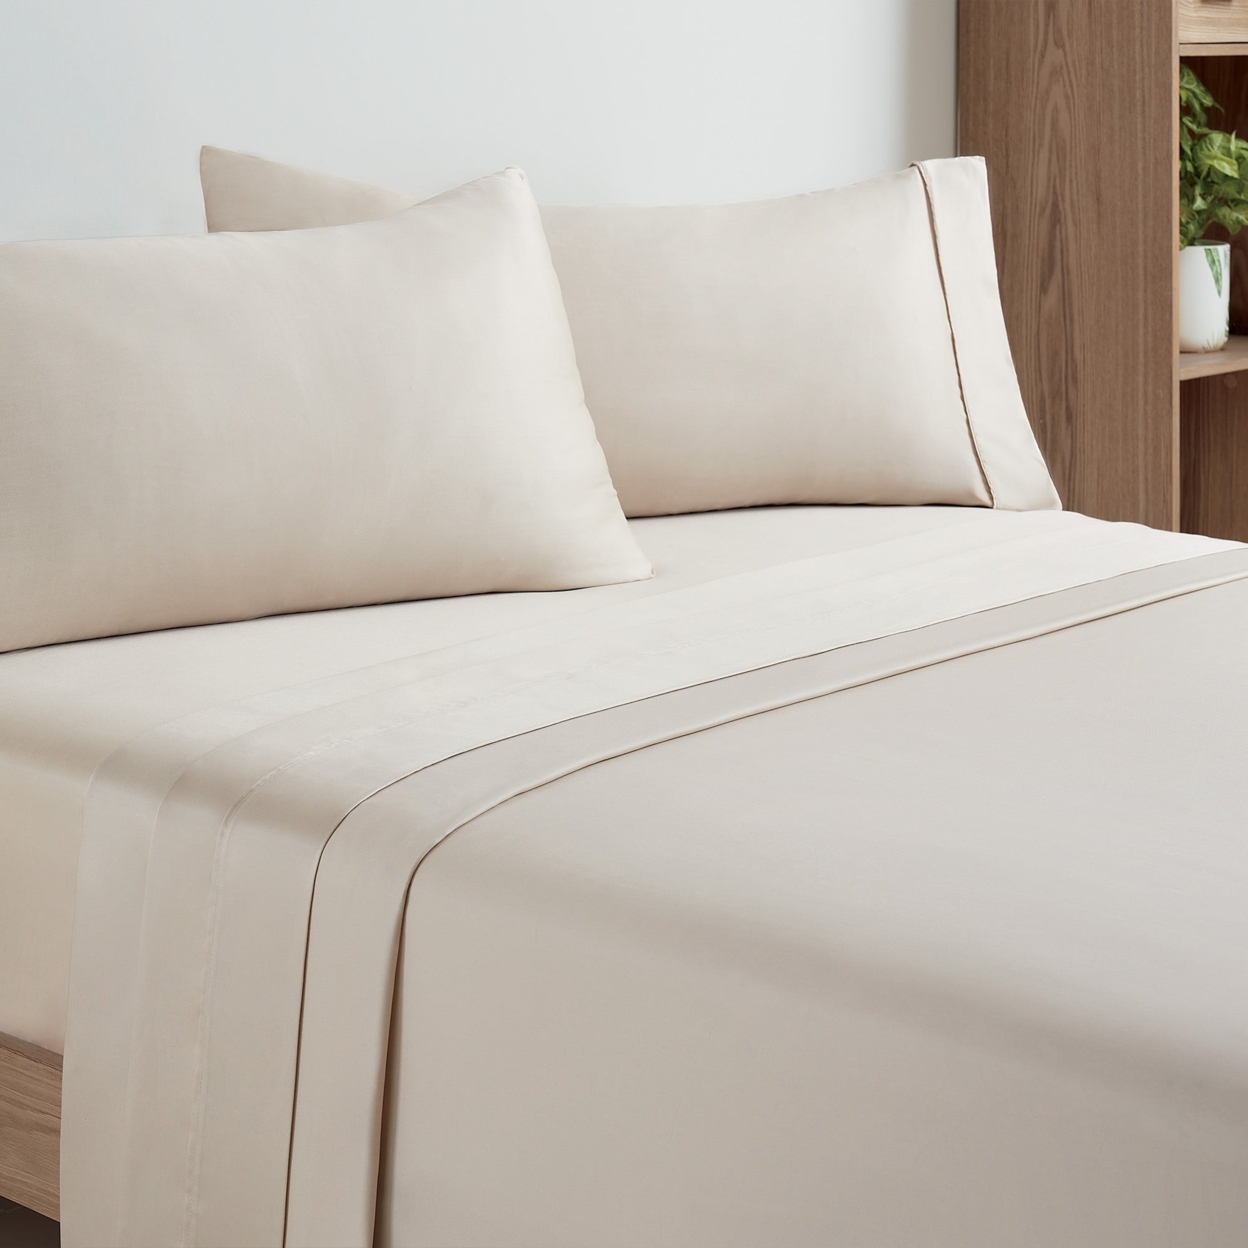 Aston and Arden Eucalyptus Tencel Sheet Set, Ultra Soft Fabric, Temperature Regulating, Breathable and Cooling, Sustainably Sourced, Eco-Friendly -